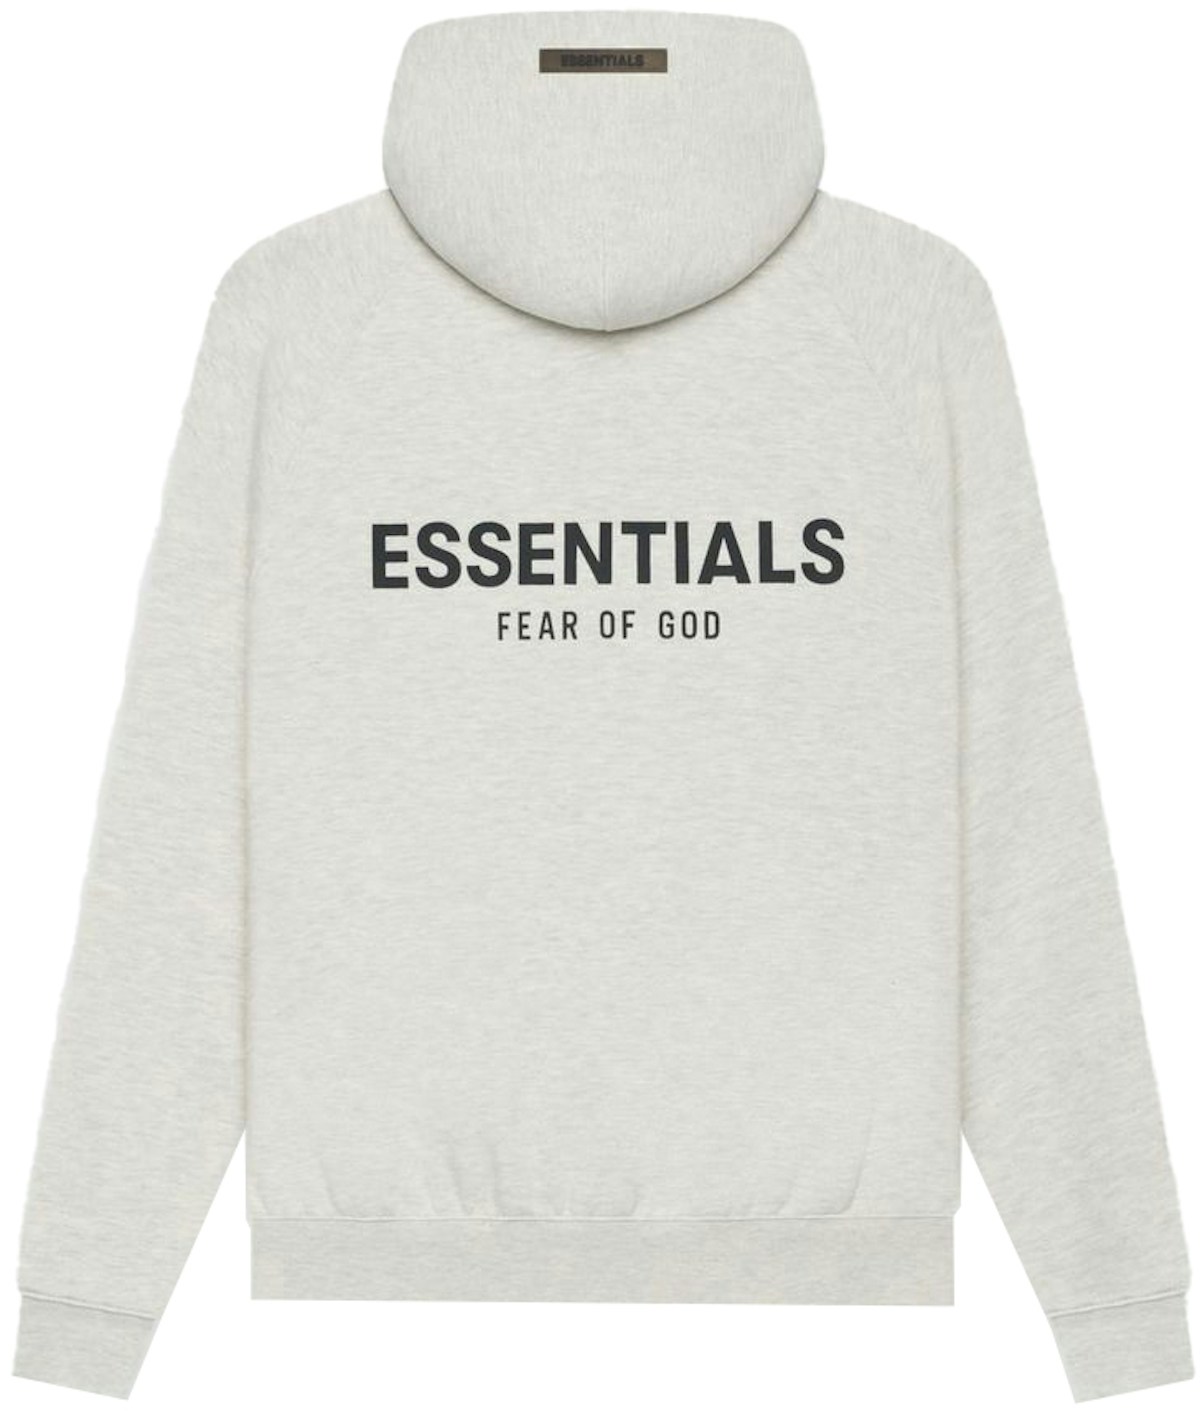 Fear of God Essentials Pullover Hoodie Light Heather Oatmeal - SS21